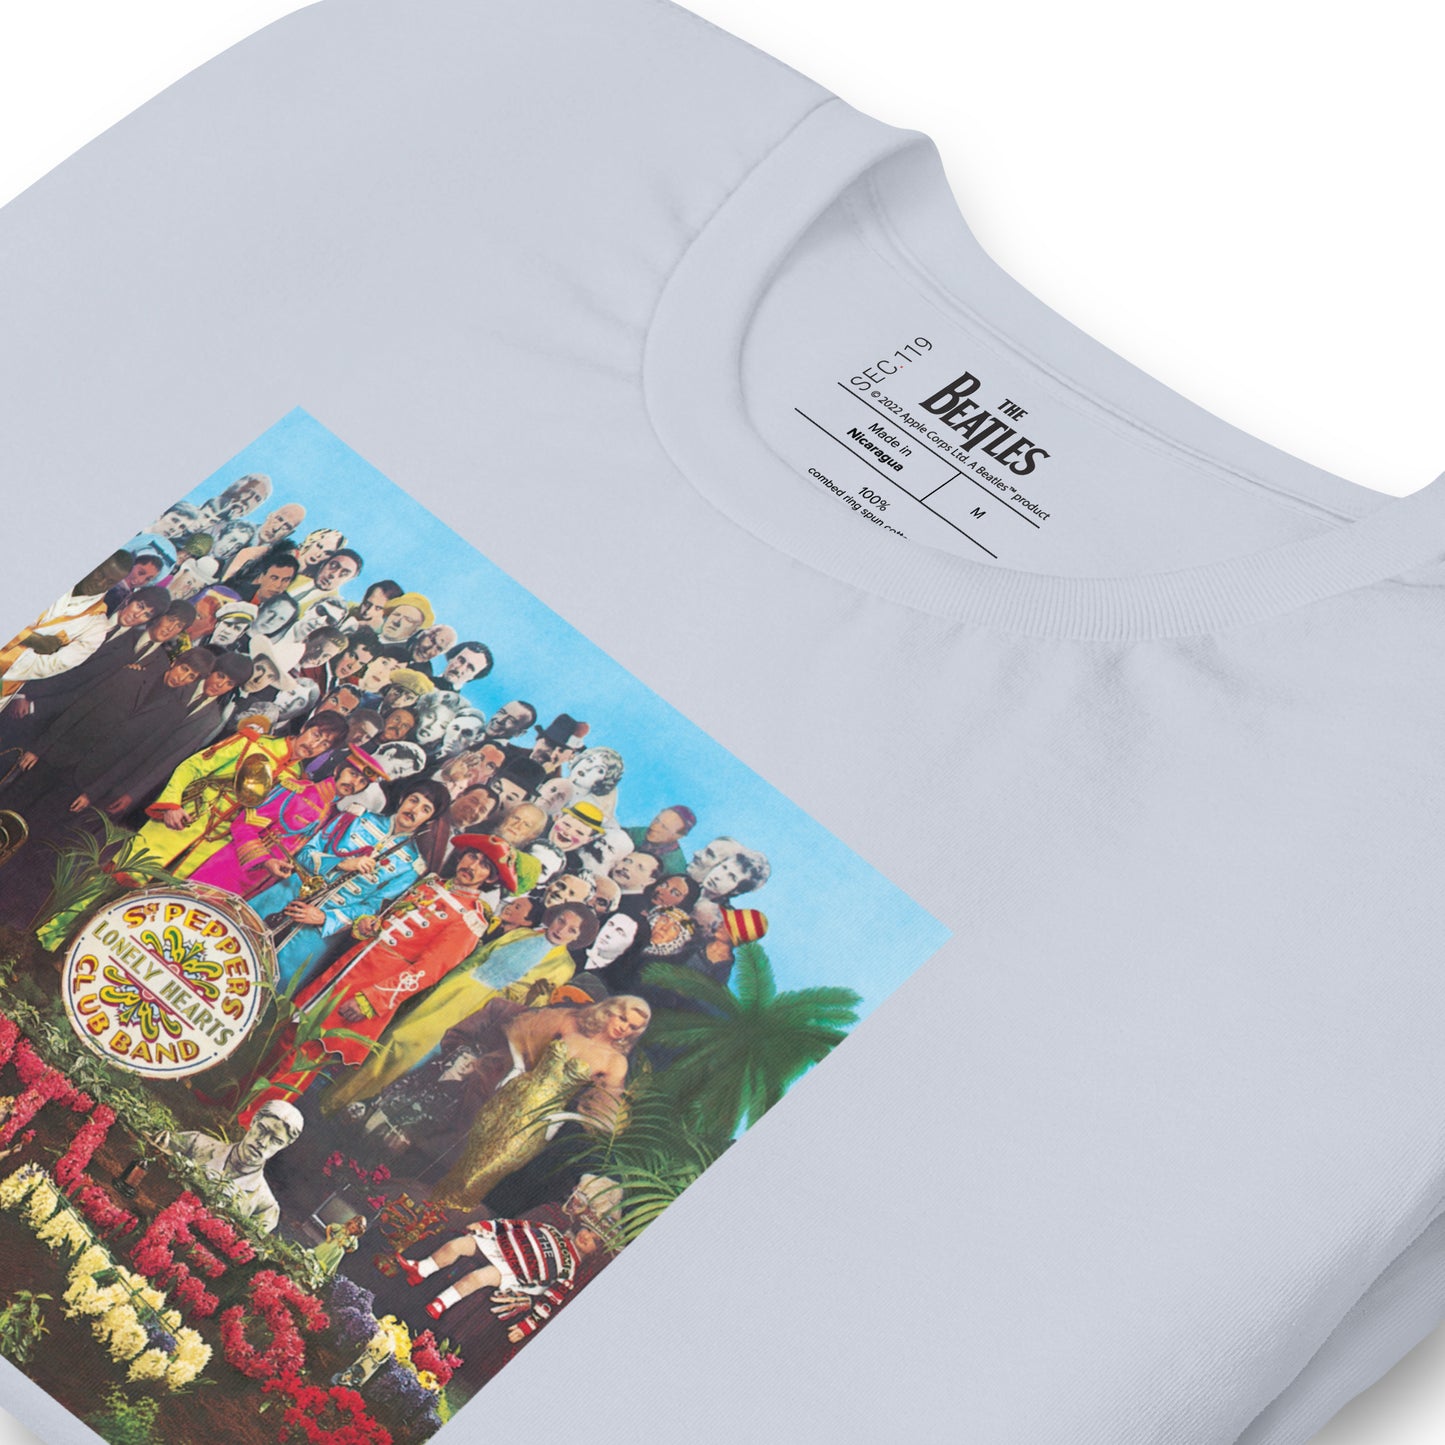 The Beatles Sgt. Peppers Classic Tee